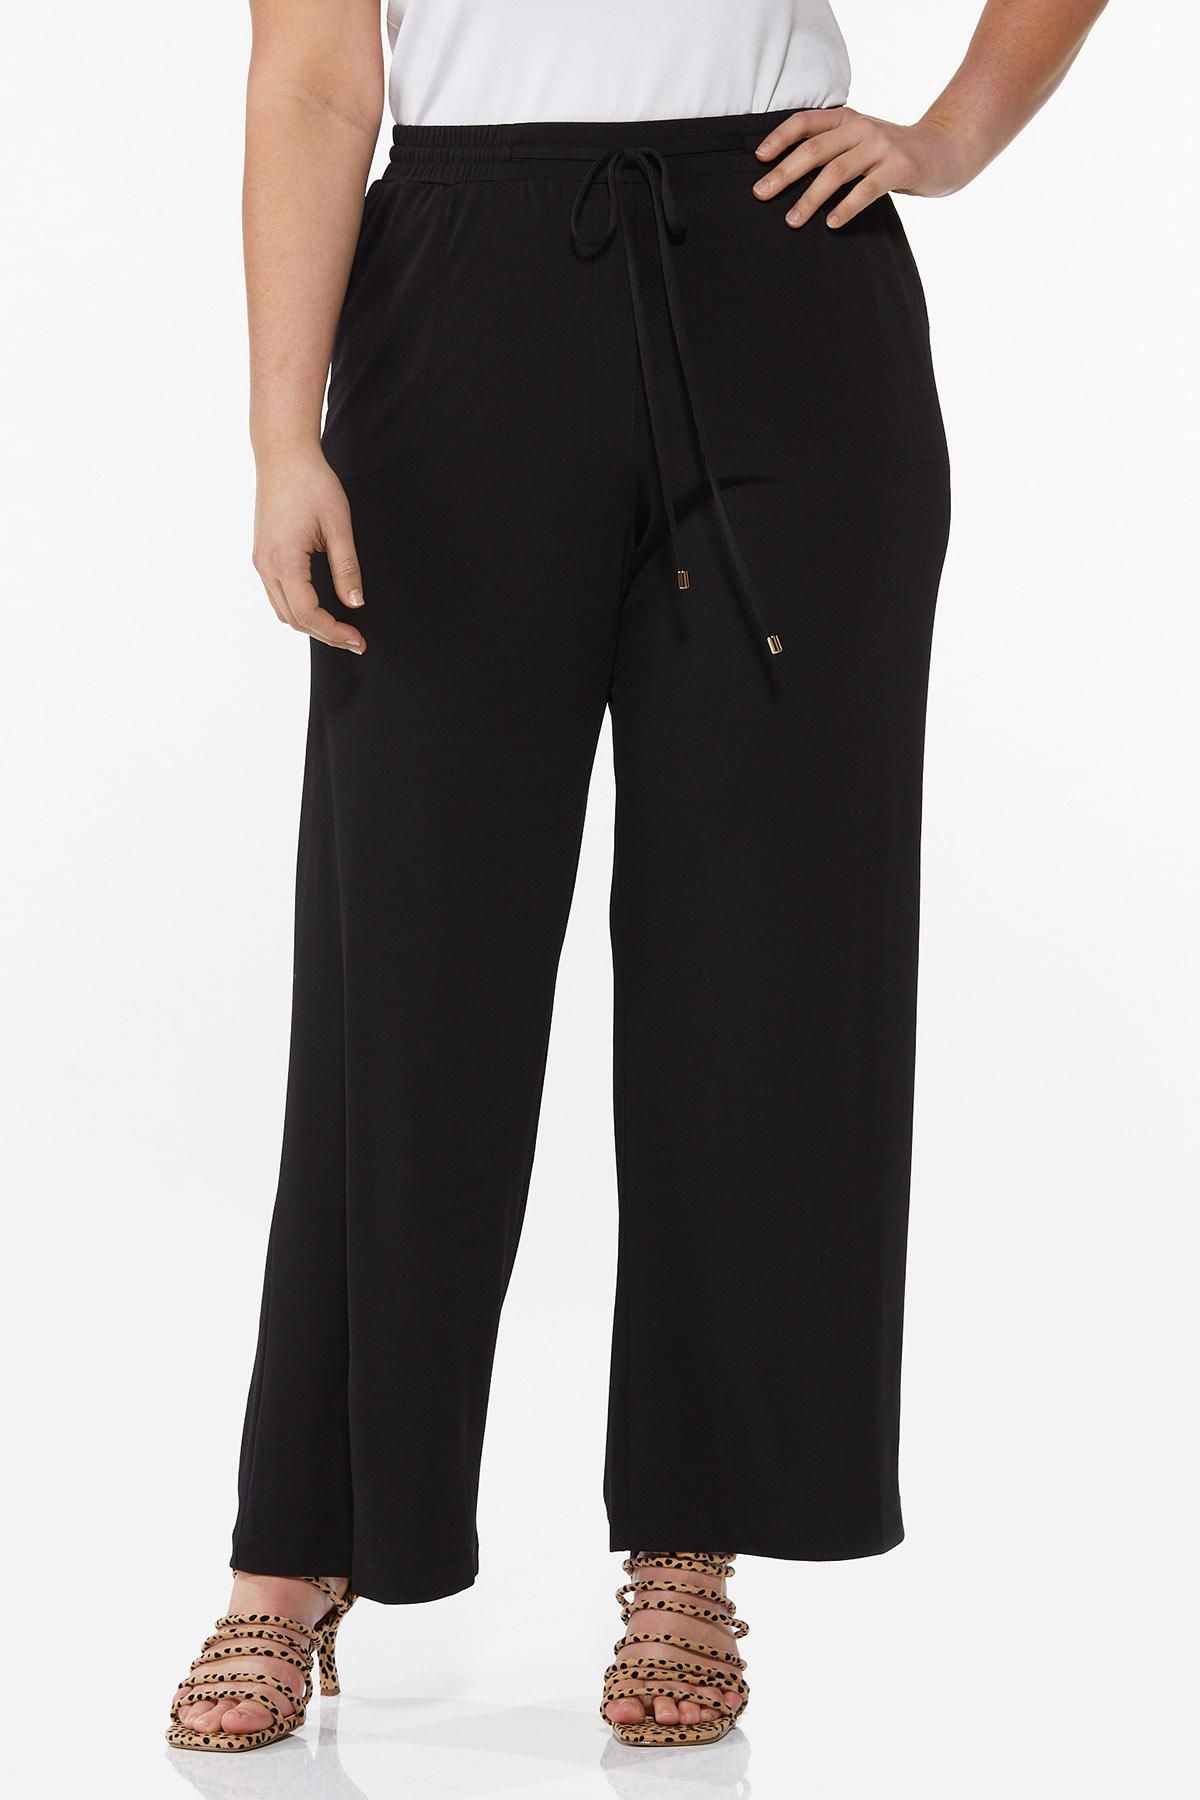 Plus Size Wide Leg Pull-On Pants | Cato Fashions